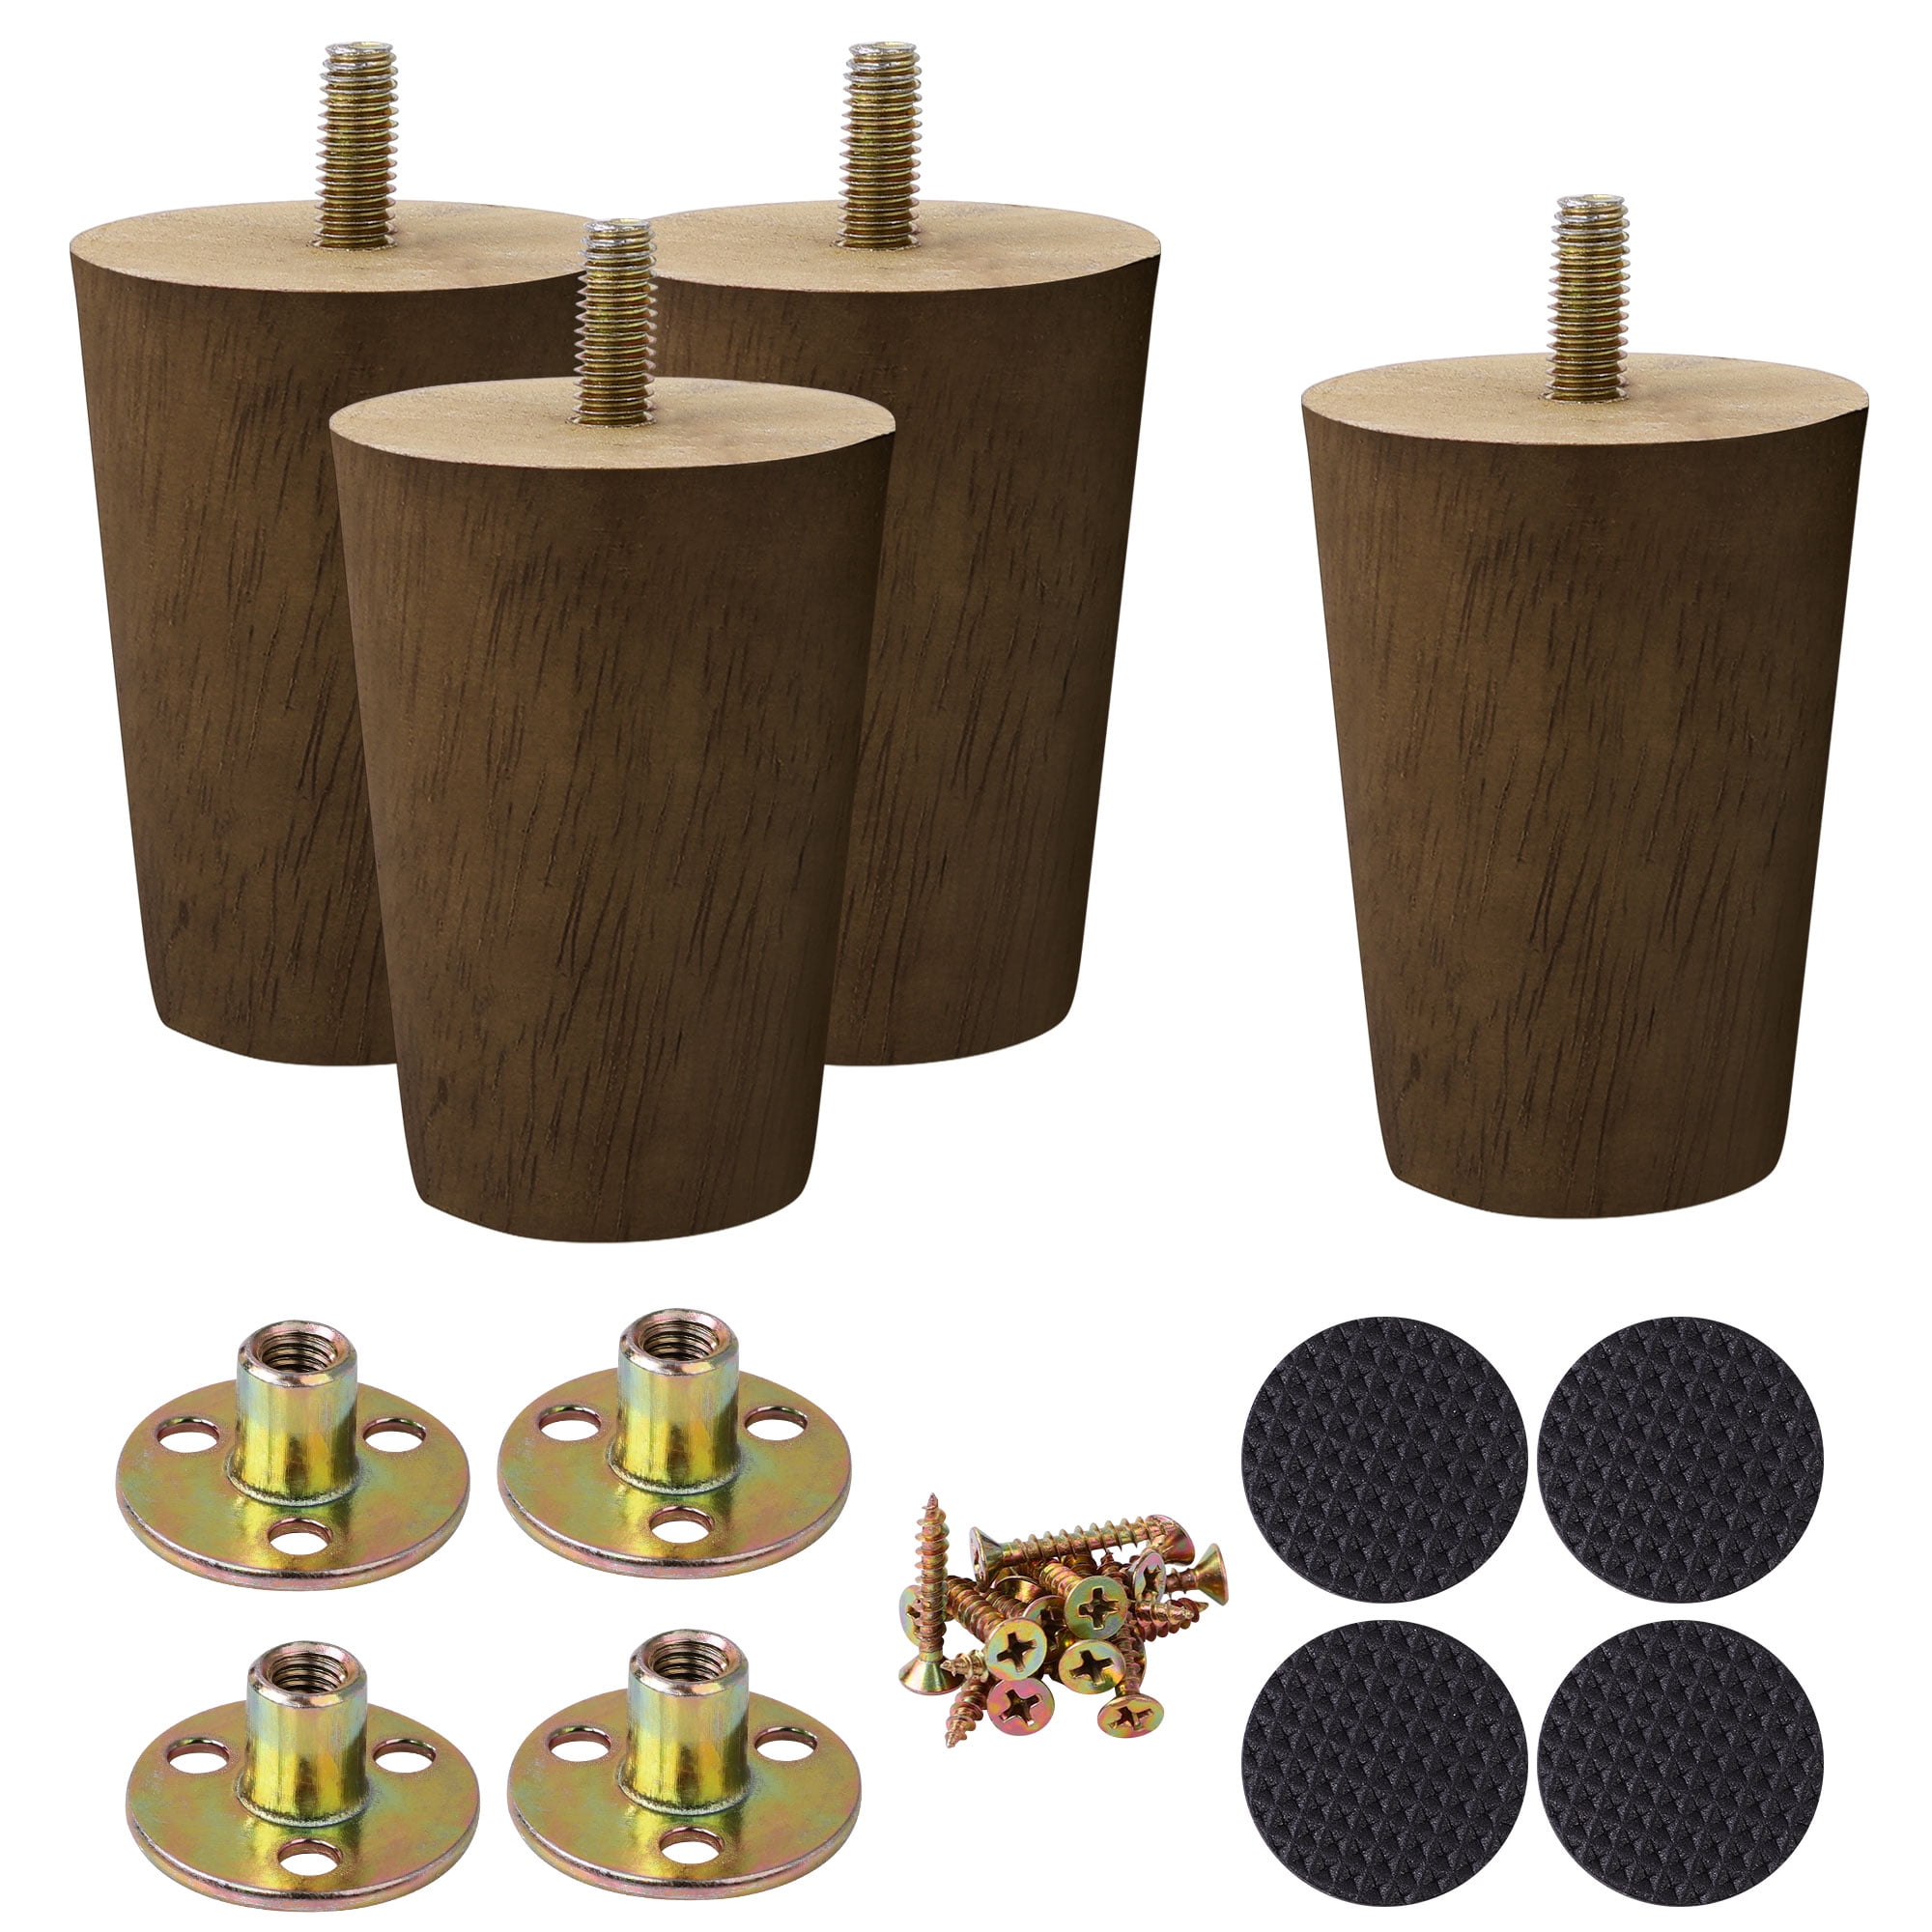 4x WOODEN FURNITURE FEET LEGS WITH BRASS CASTORS FOR SOFAS CHAIRS SETTEES M8 